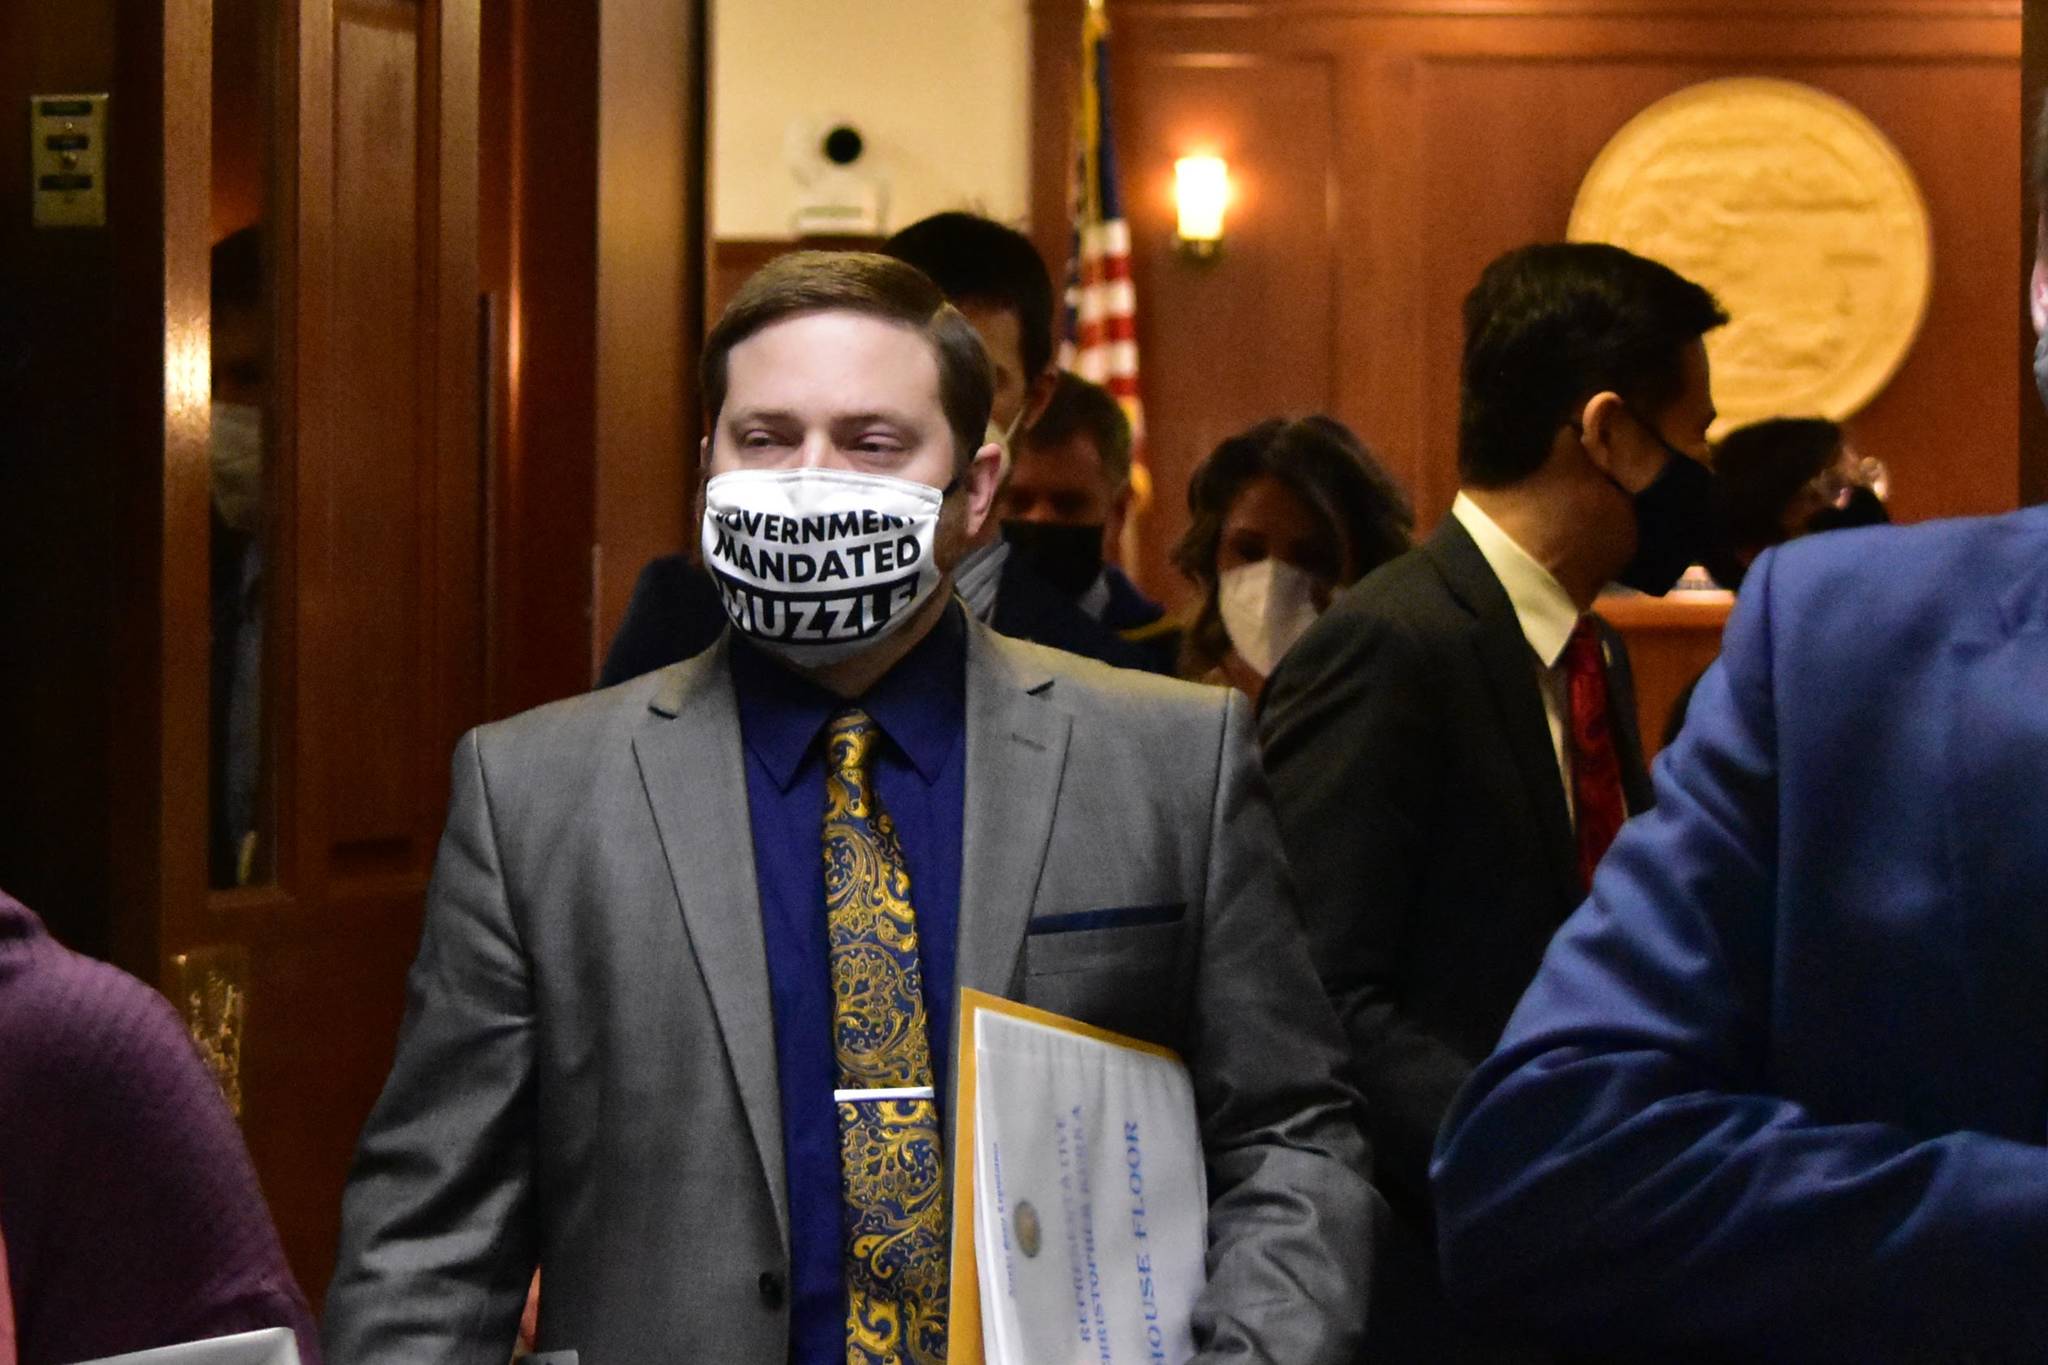 Rep. Chris Kurka, R-Wasilla, leaves the chambers of the Alaska House of Representatives on Friday, March 19, 2021, after an hour of delays concerning the wording on his mask. (Peter Segall / Juneau Empire)